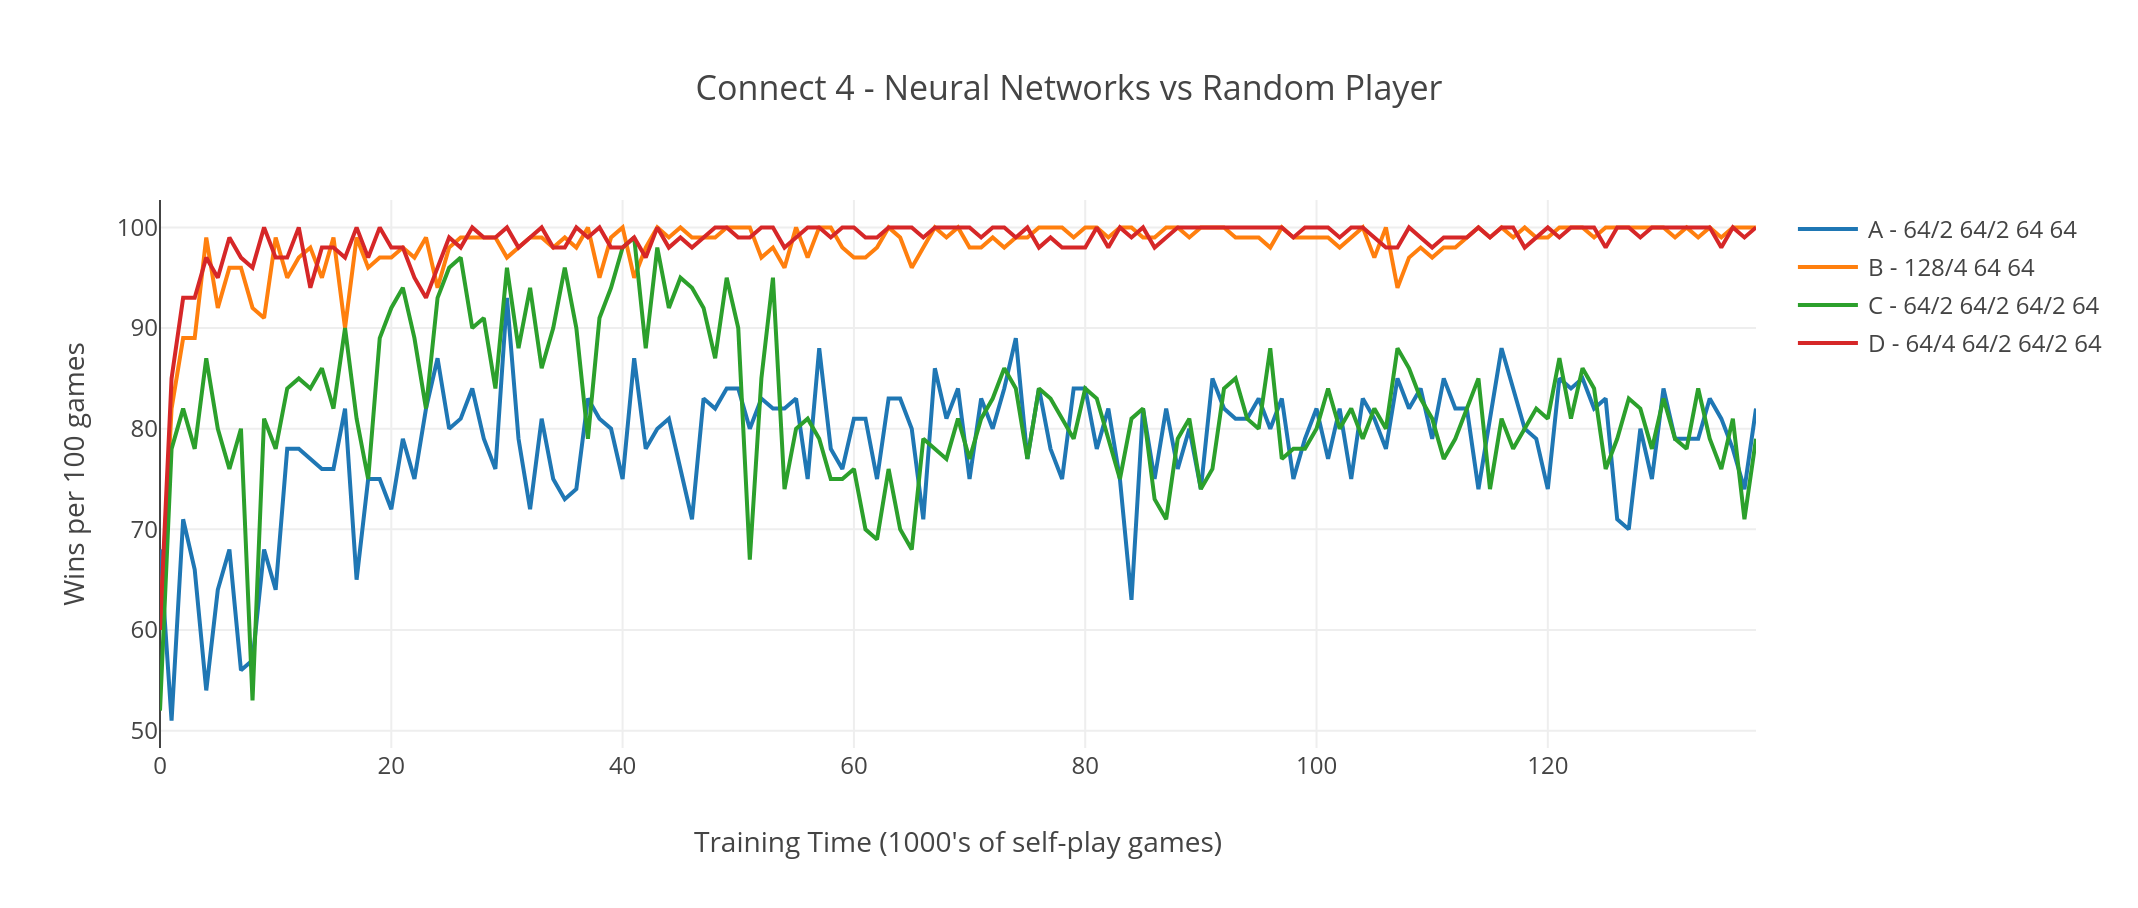 Graph showing Neural Networks vs Random Players in game of Connect 4